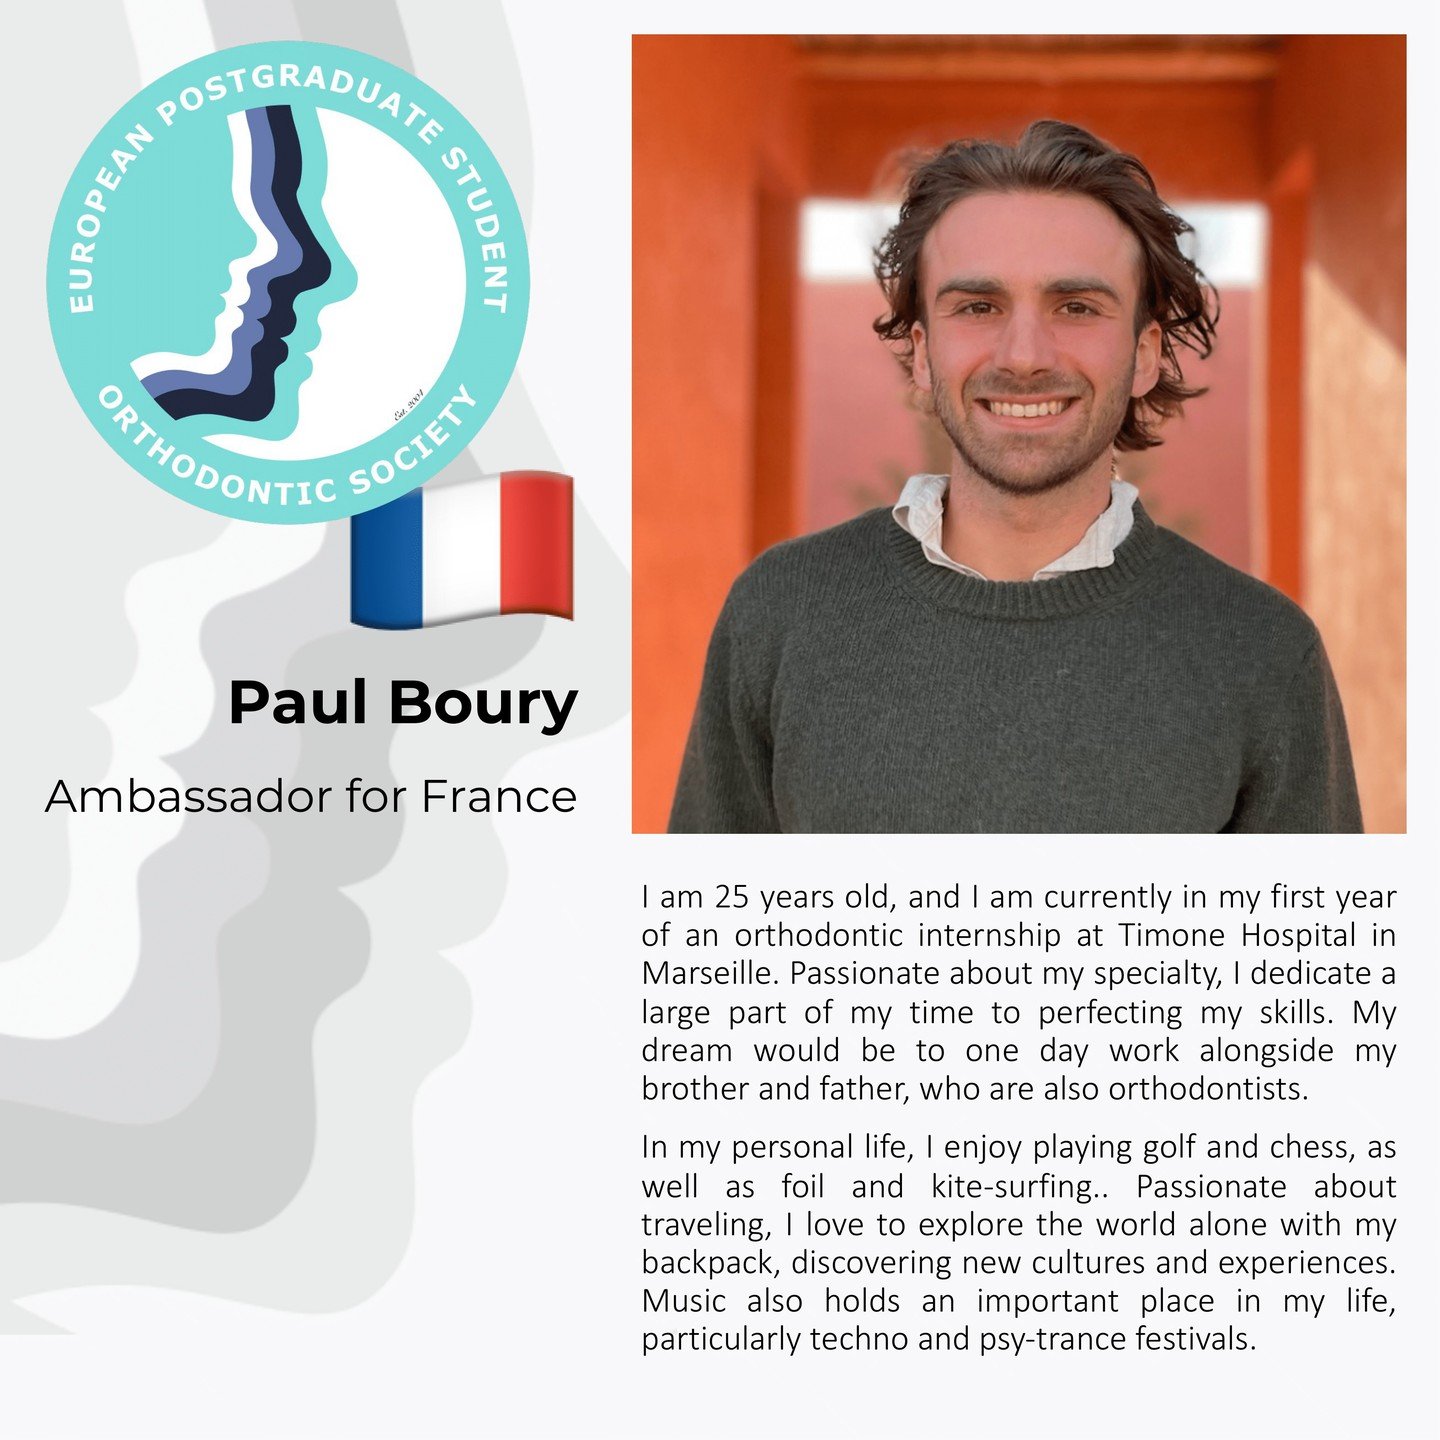 Welcome Paul, the new EPSOS Ambassador for France! 👋

If you'd like to represent your country as an EPSOS ambassador, reach out to epsosmail@gmail.com 💙